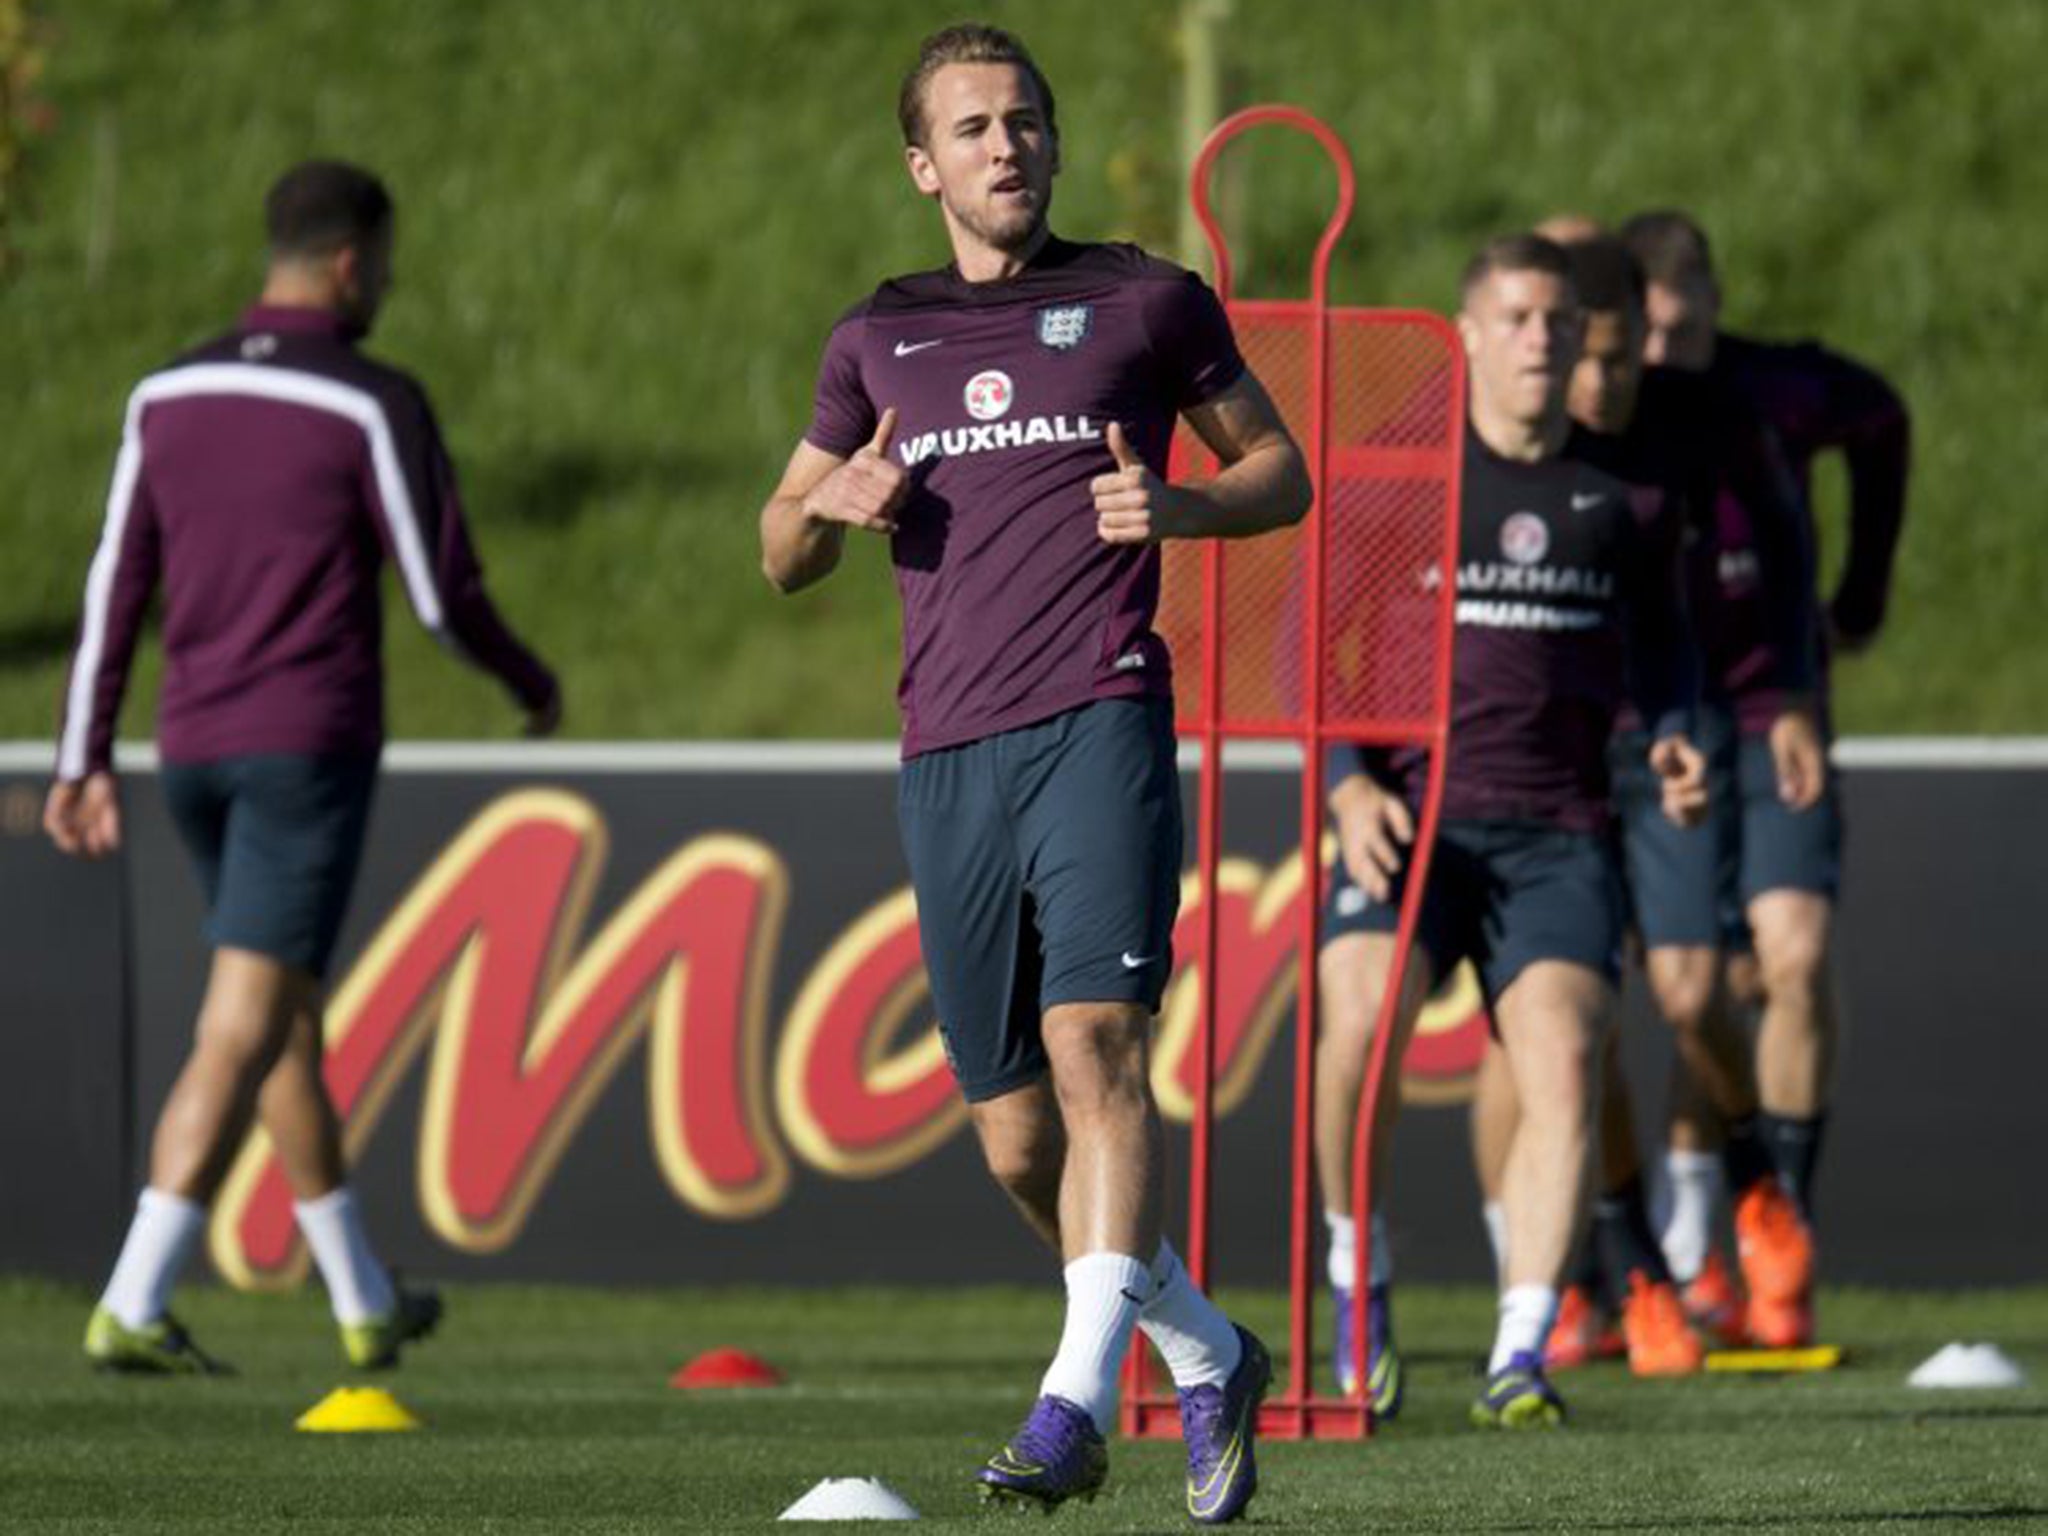 Harry Kane is set to make his first start for England against Estonia on Friday night